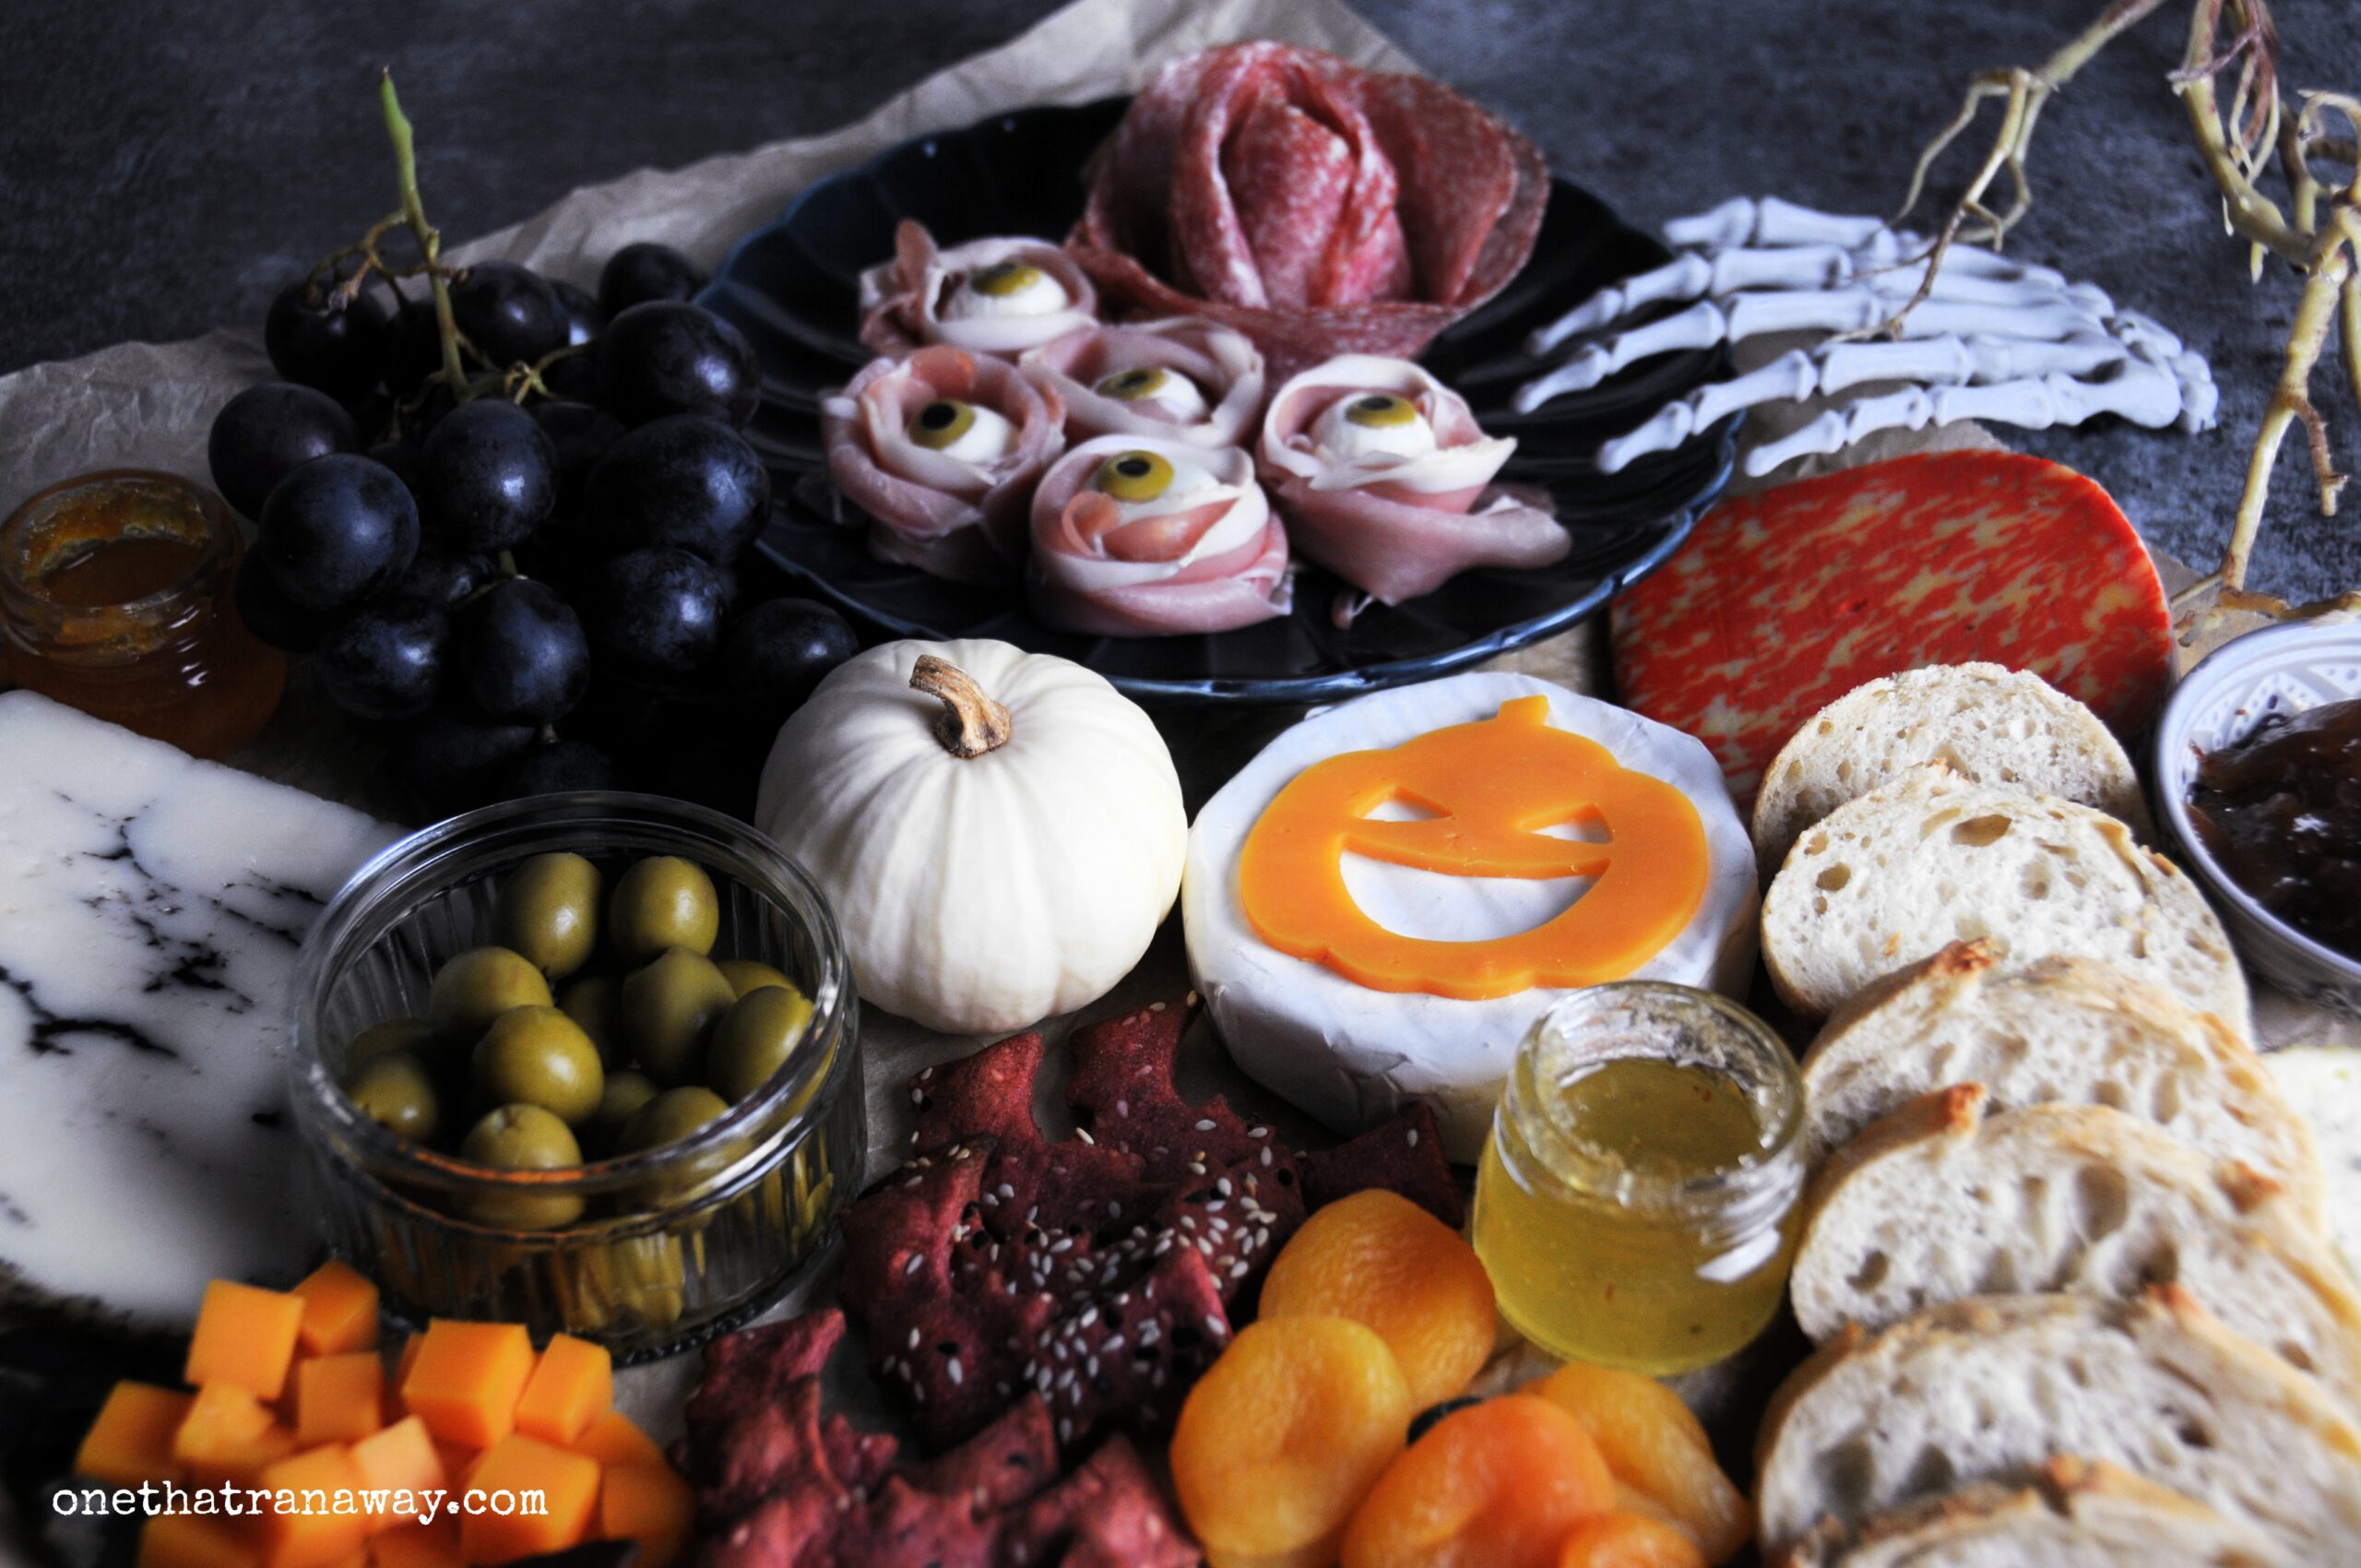 a Halloween themed cheese platter with mozzarella eyeballs, bread and bat shaped crackers on a silver platter